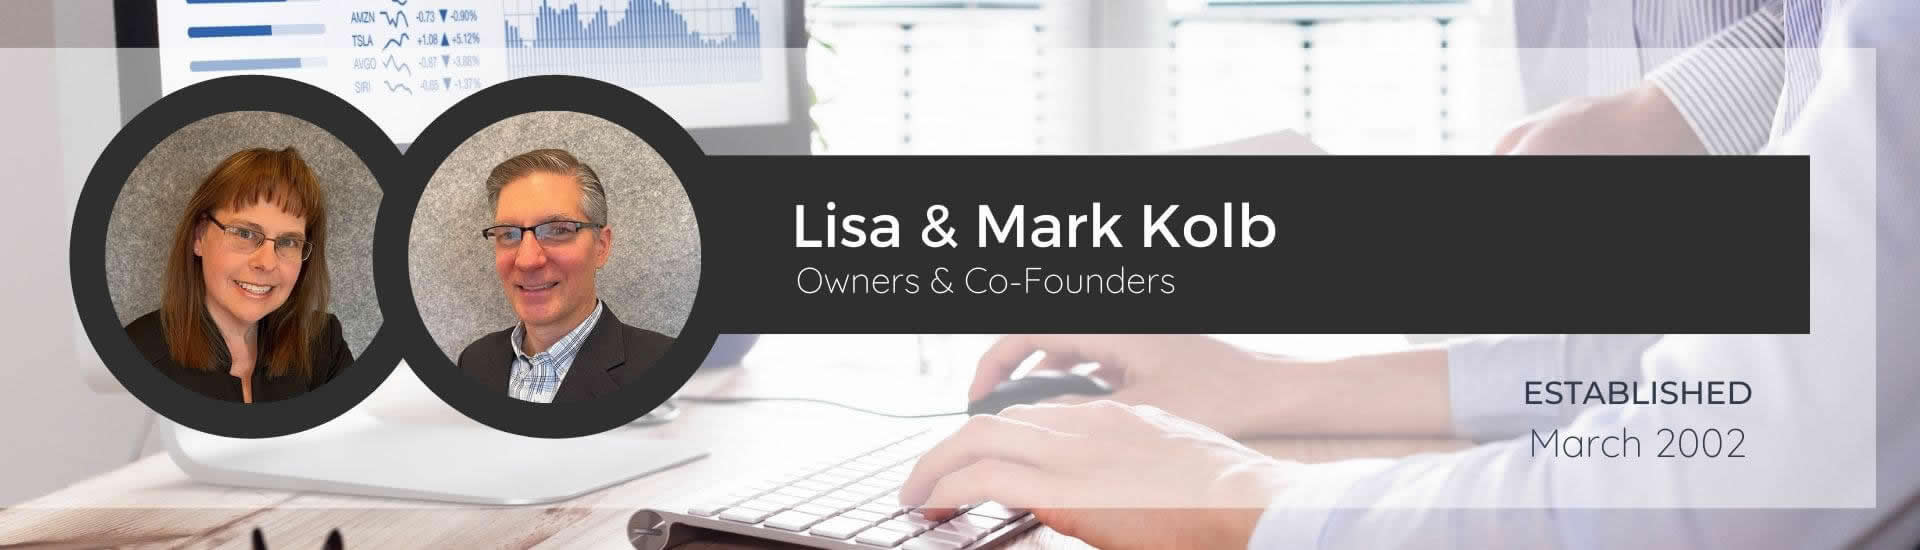 Lisa and Mark Kolb, Owners and Co-Founders for Acorn Marketing, on a background of a desktop monitor and keyboard on a desk.